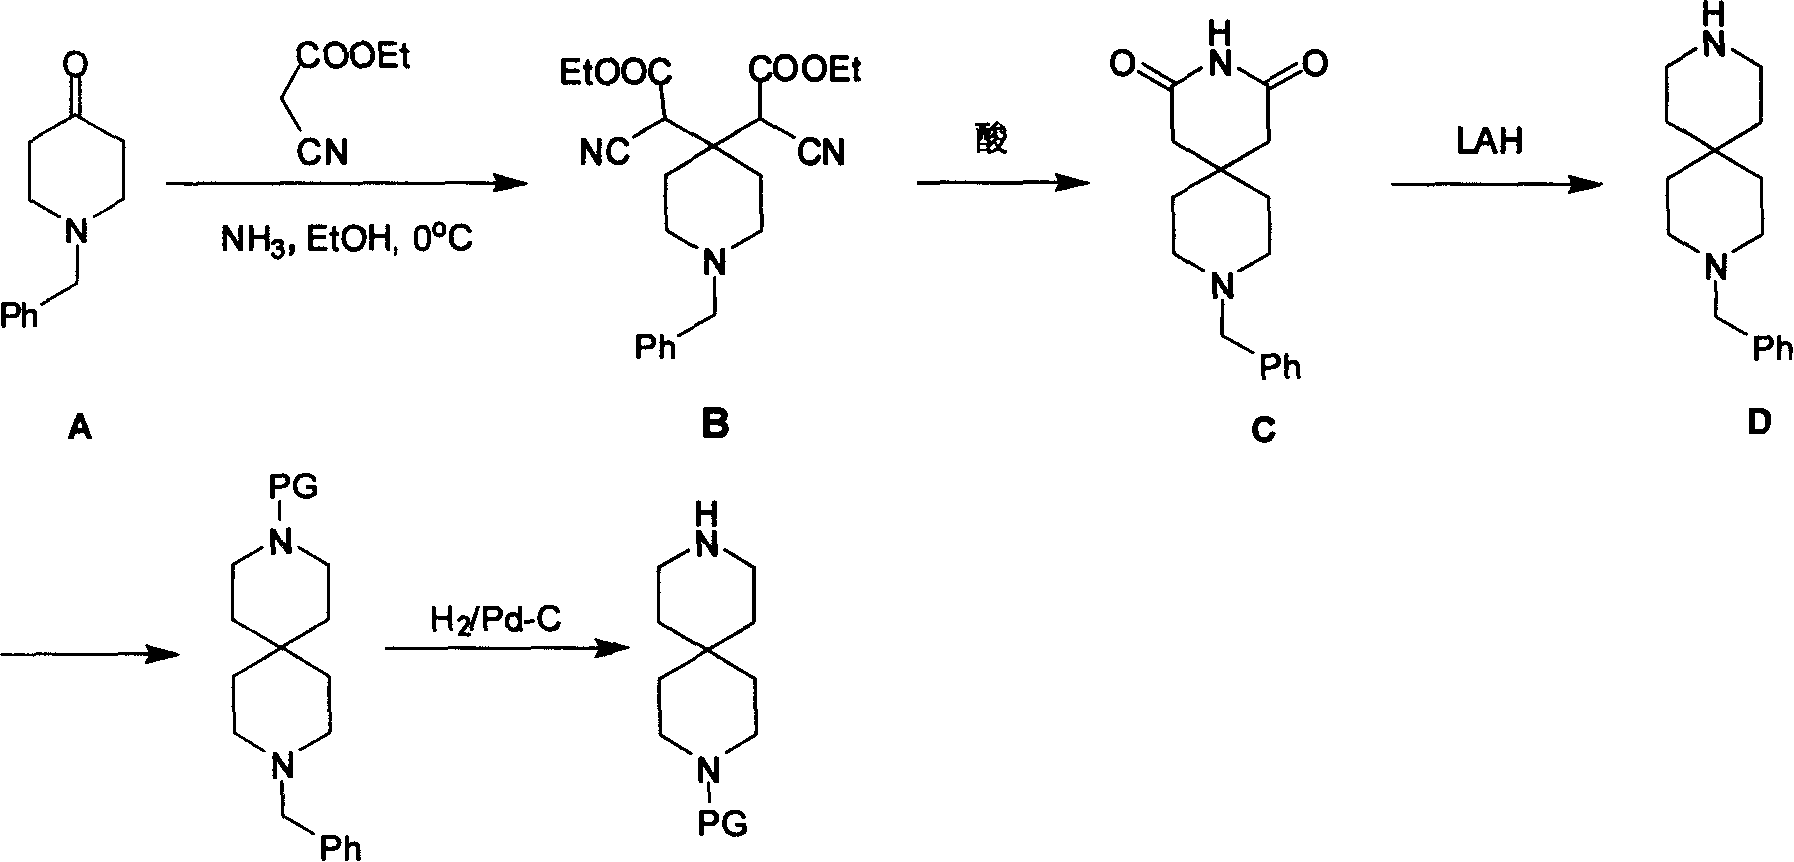 Method for synthesizing 3,9-diaza spiro[5.5] undecane template compounds